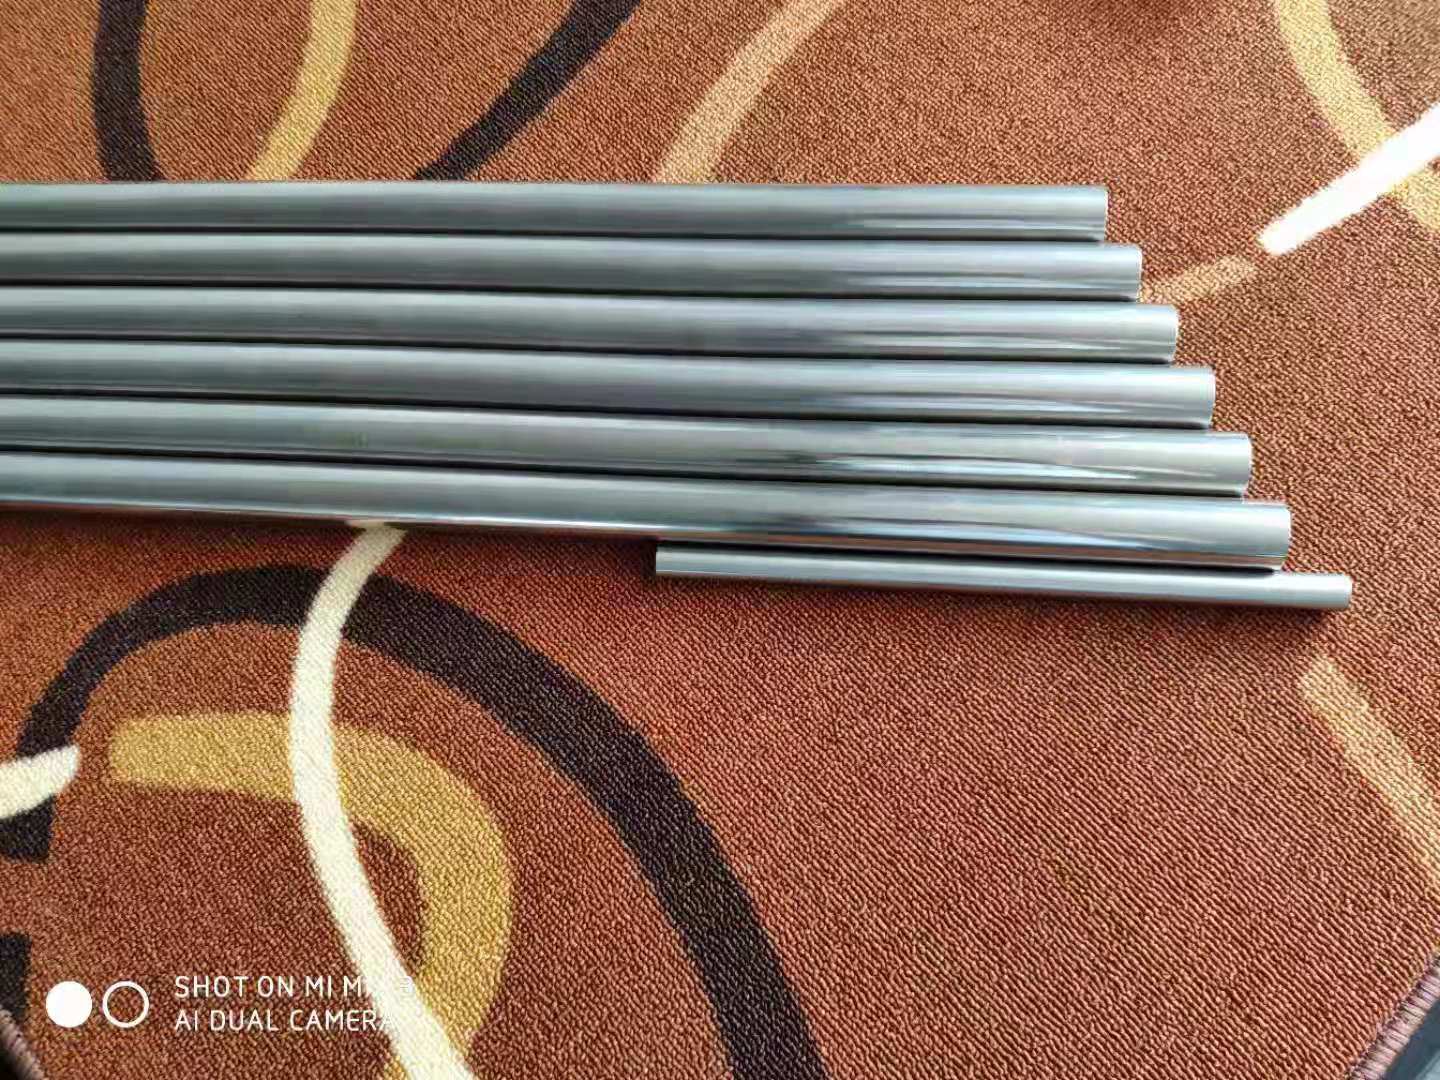 Stainless steel seamless pipe